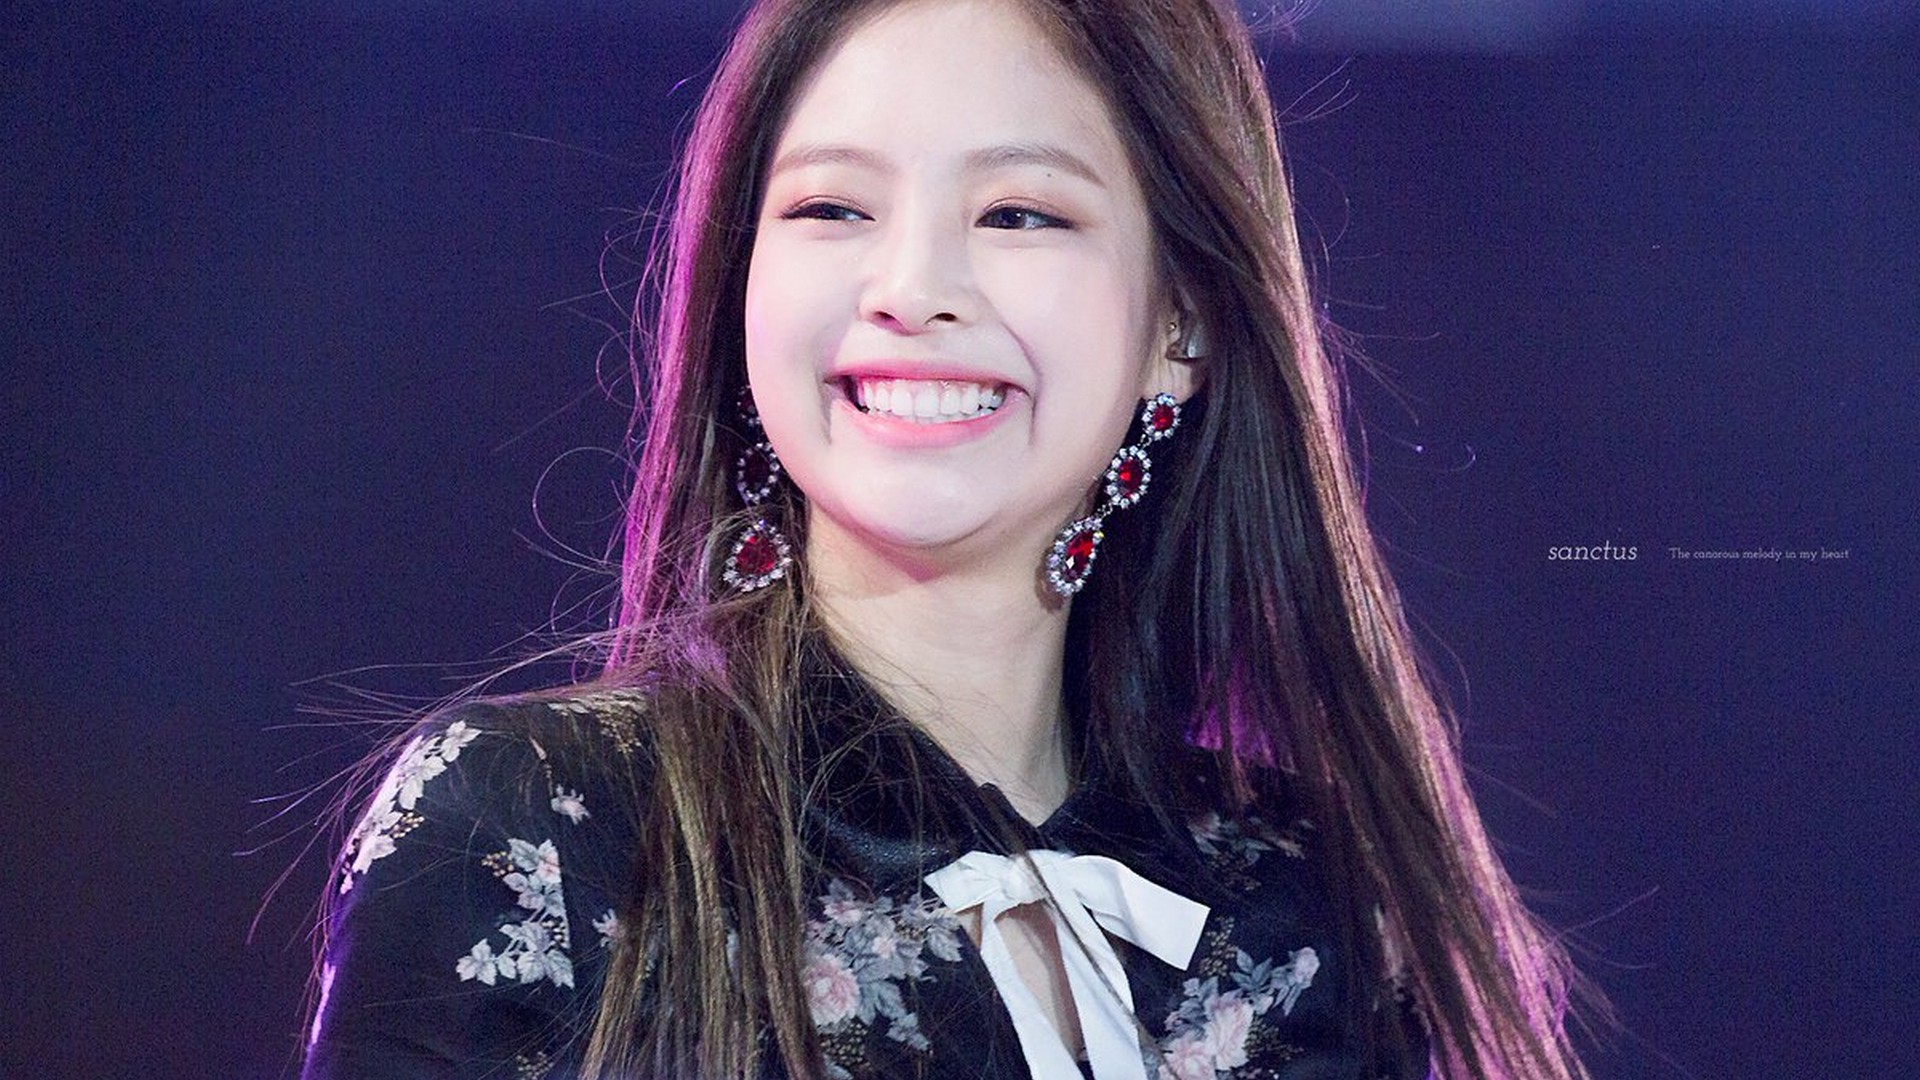 Jennie Blackpink Wallpaper With High-resolution Pixel - Jennie Blackpink Wallpaper Desktop , HD Wallpaper & Backgrounds